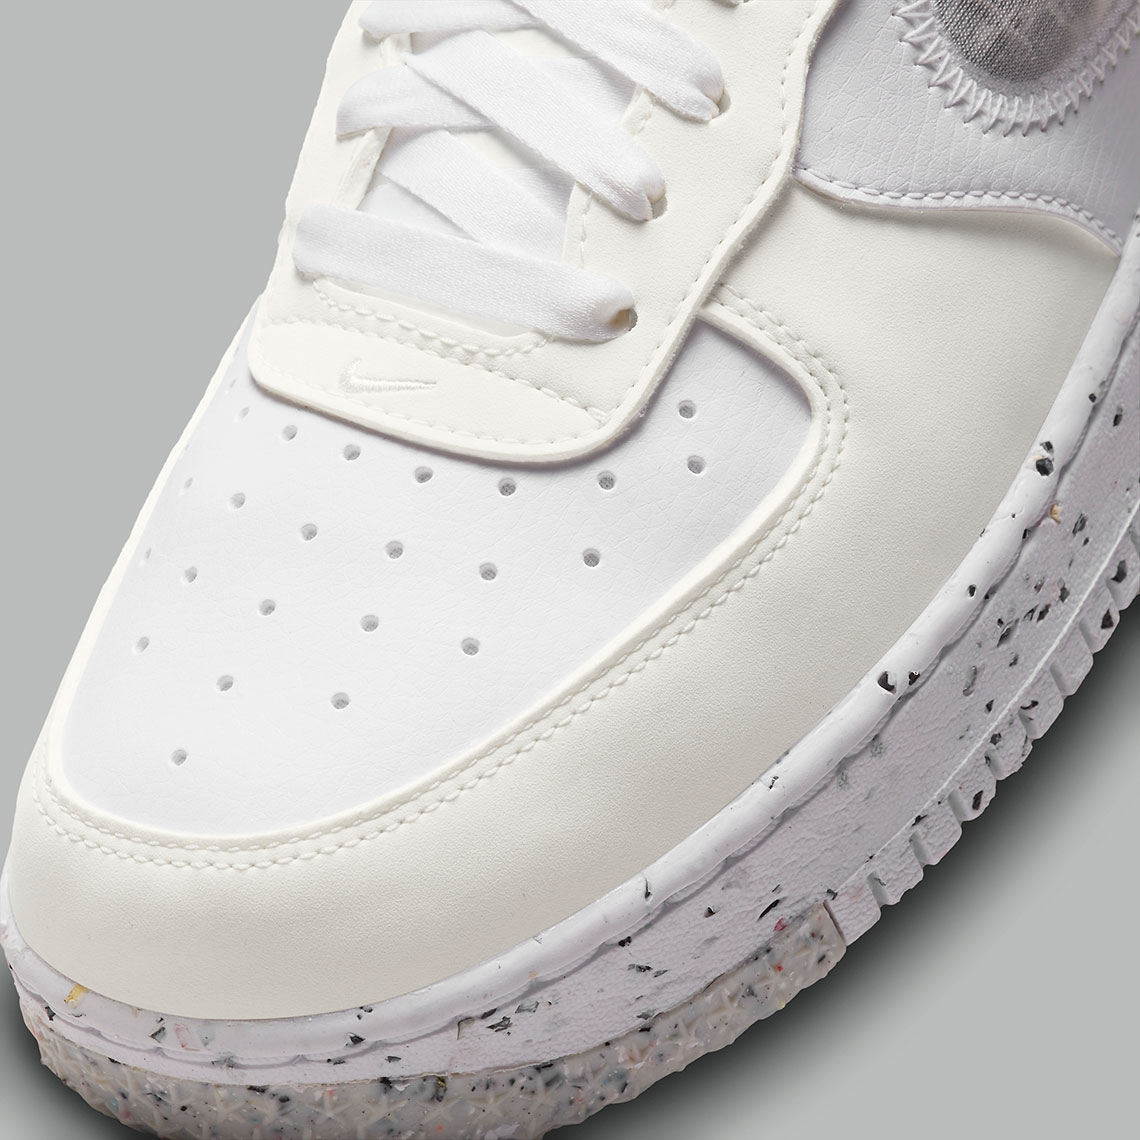 Nike Air Force 1 Low Crater White Sail Dh0927 101 1